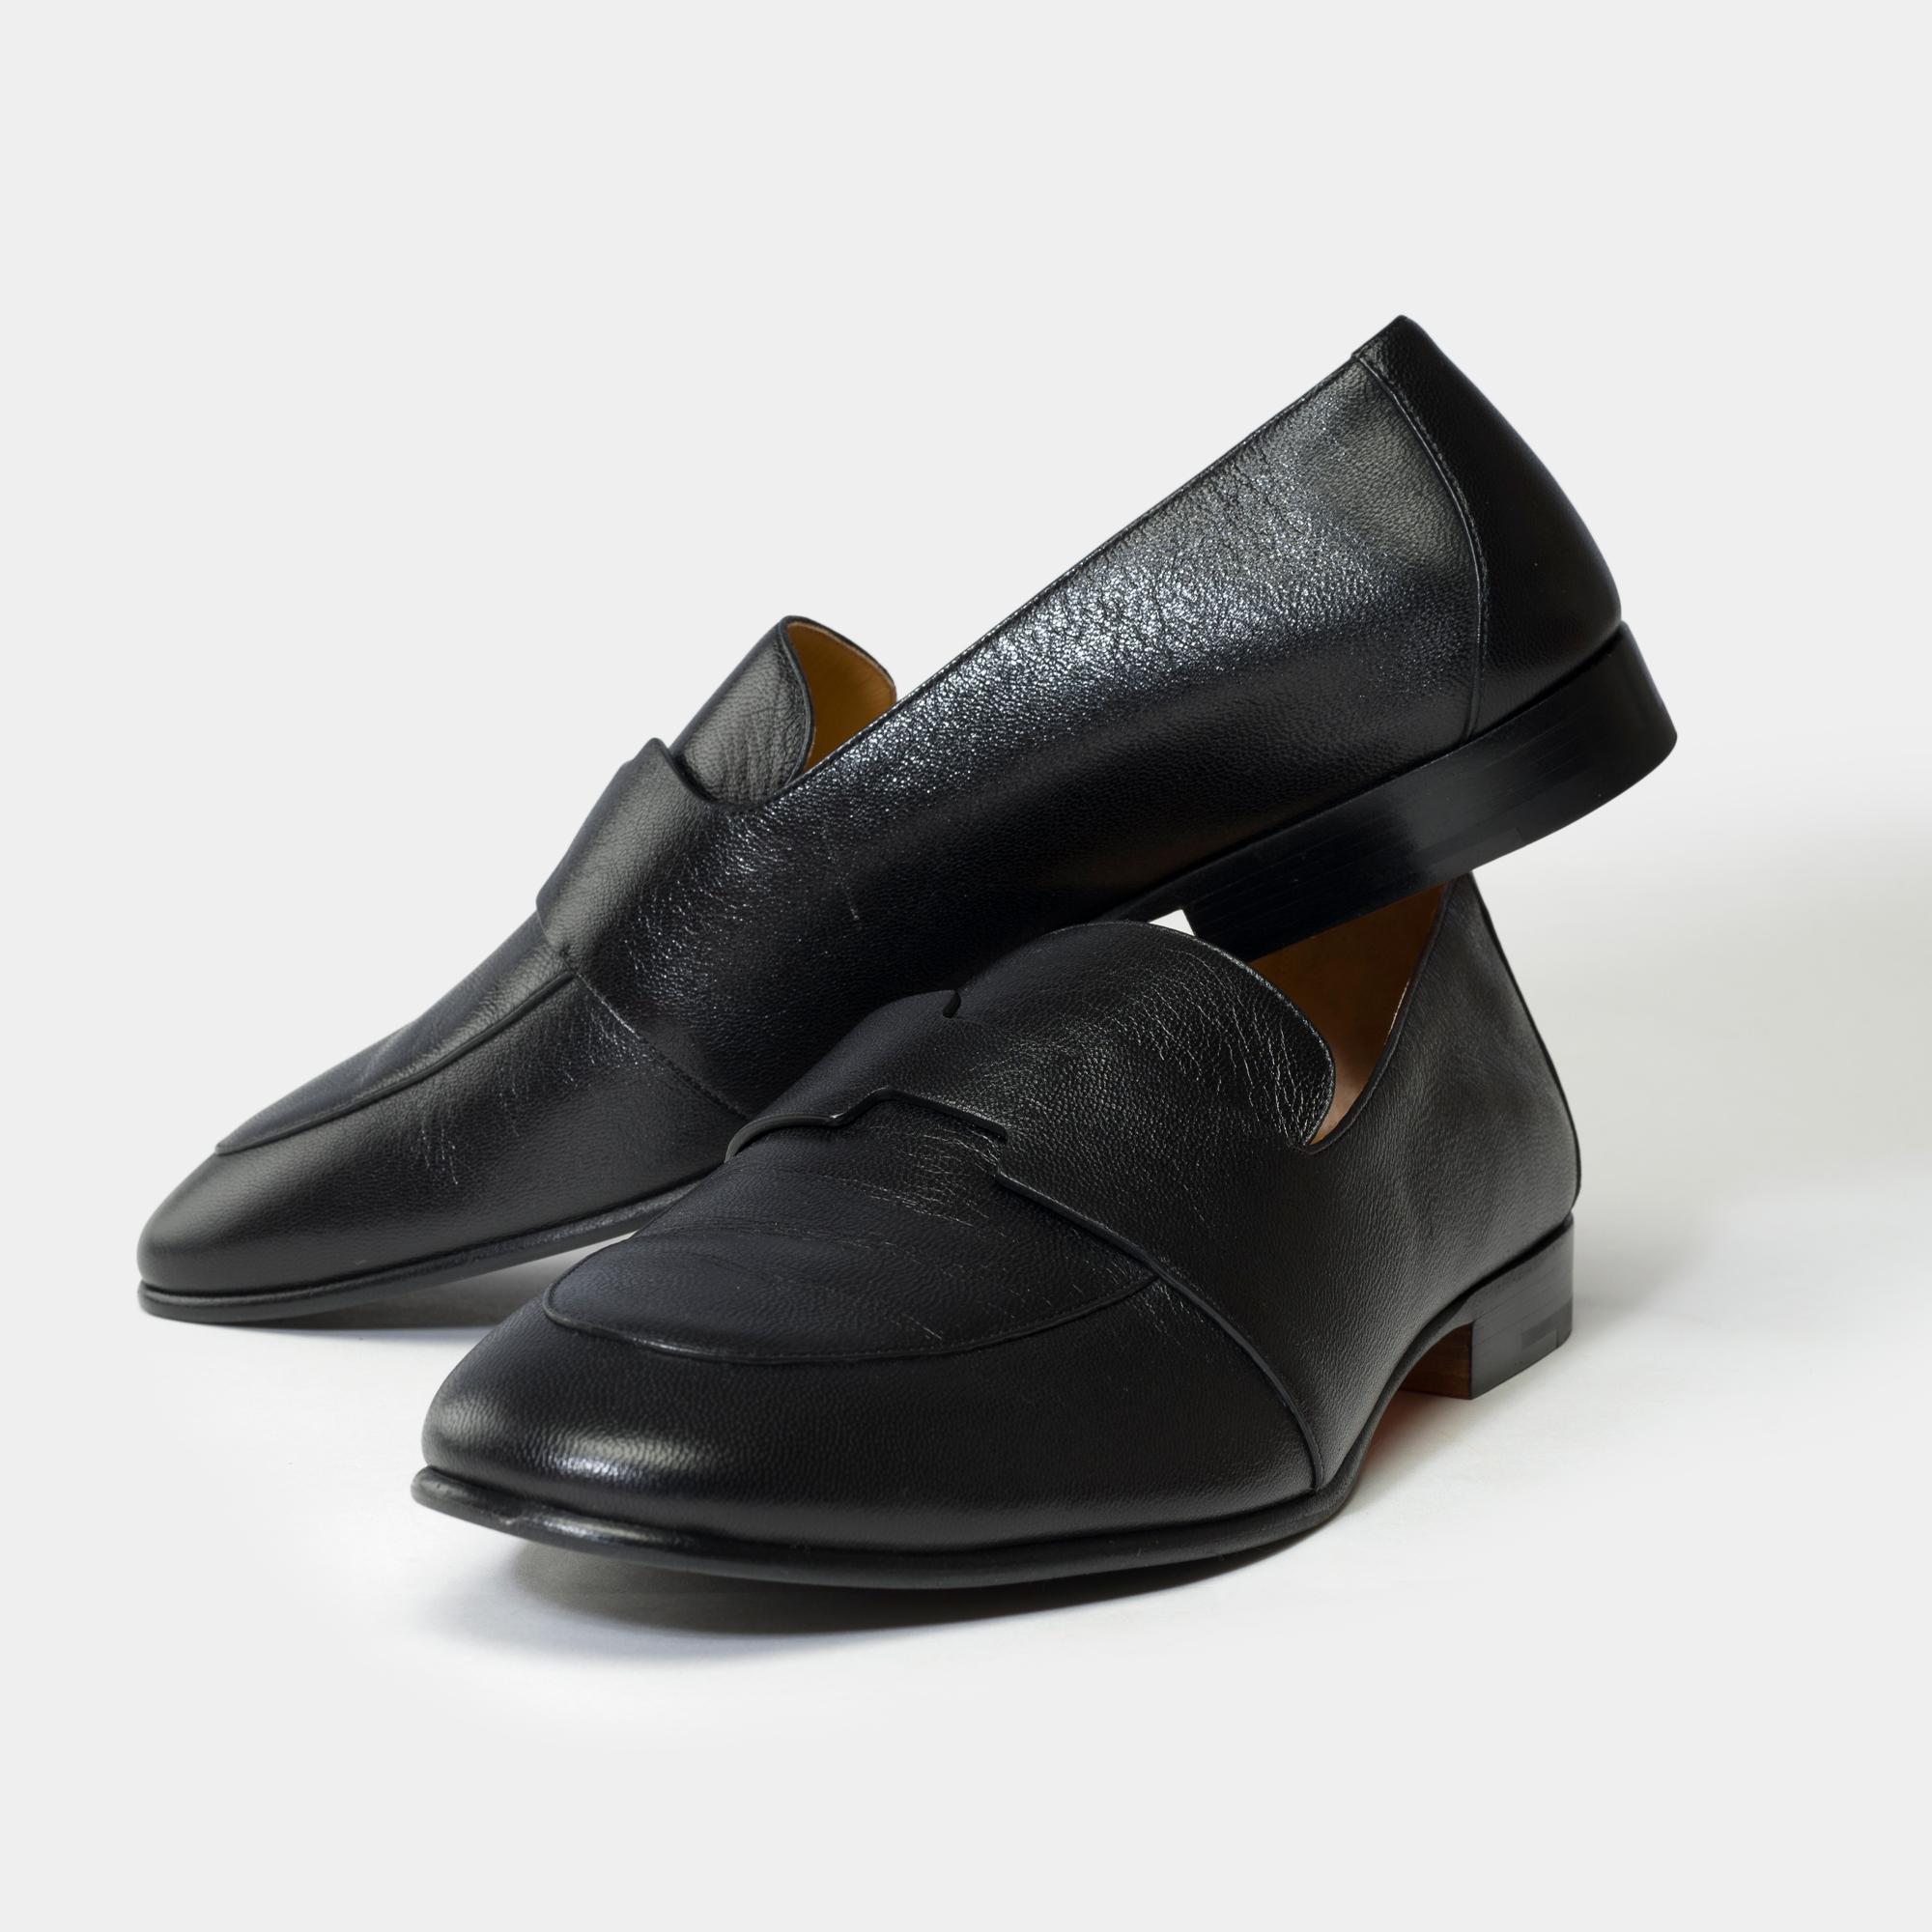 Hermès​ ​Ancora​ ​soft​ ​goat​ ​loafer,​ ​cut​ ​out​ ​«H»,​ ​for​ ​a​ ​casual​ ​look​ ​and​ ​an​ ​elegant​ ​silhouette.​ ​A​ ​men’s​ ​wardrobe​ ​essential
Orange​ ​leather​ ​sole,​ ​black​ ​rubber​ ​insert
Smooth​ ​black​ ​leather
First​ ​and​